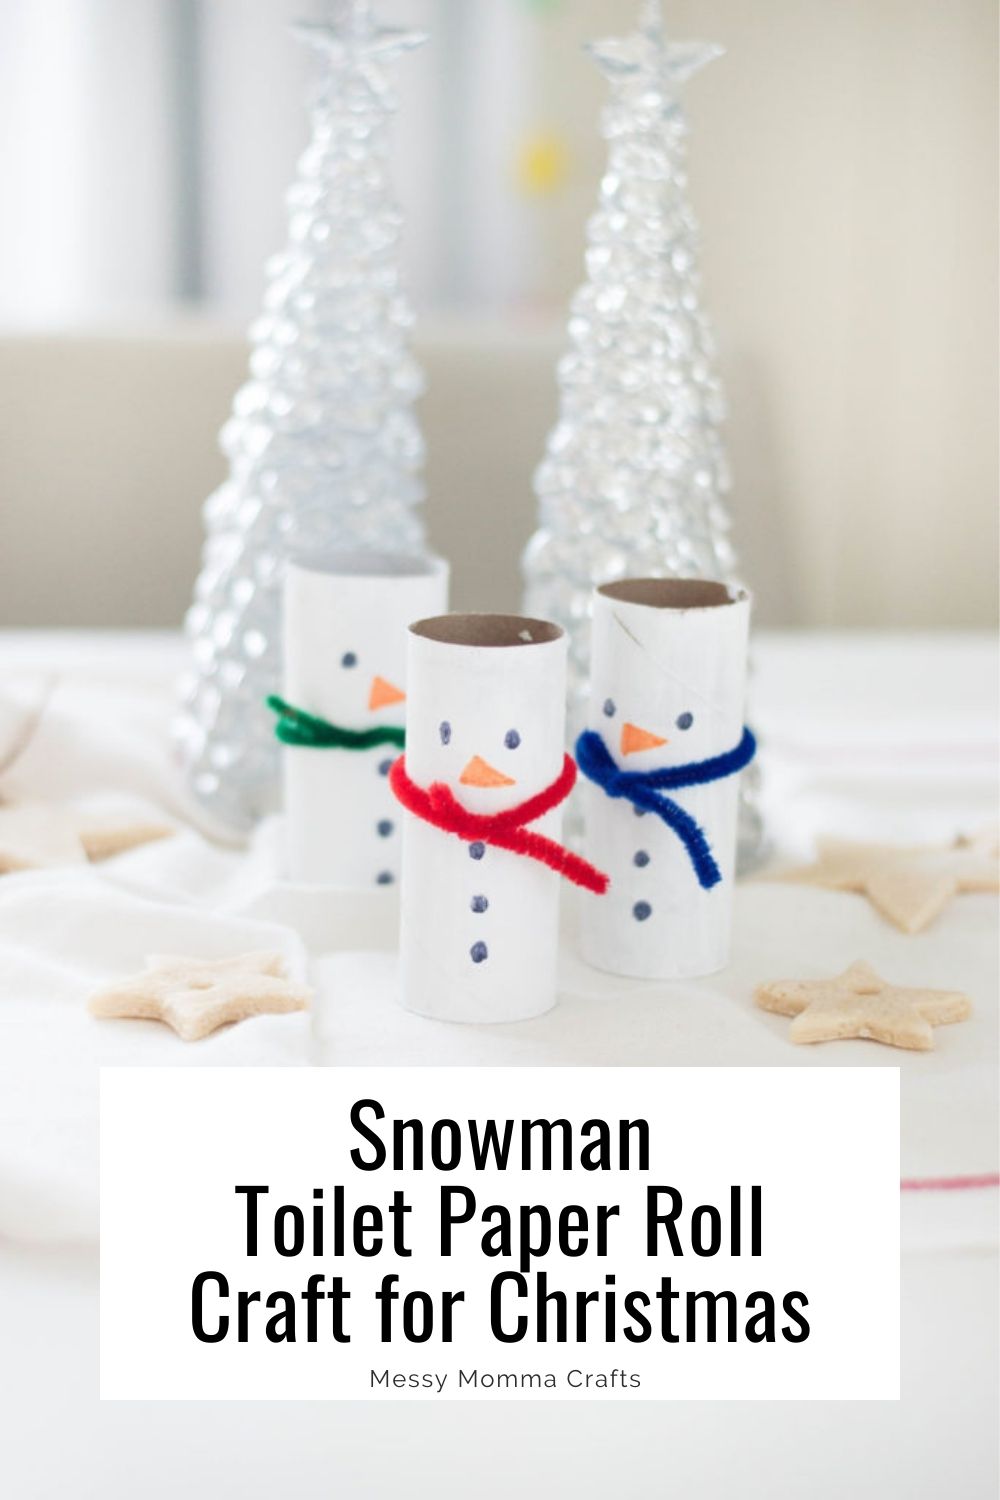 Snowman toilet paper roll craft for Christmas.